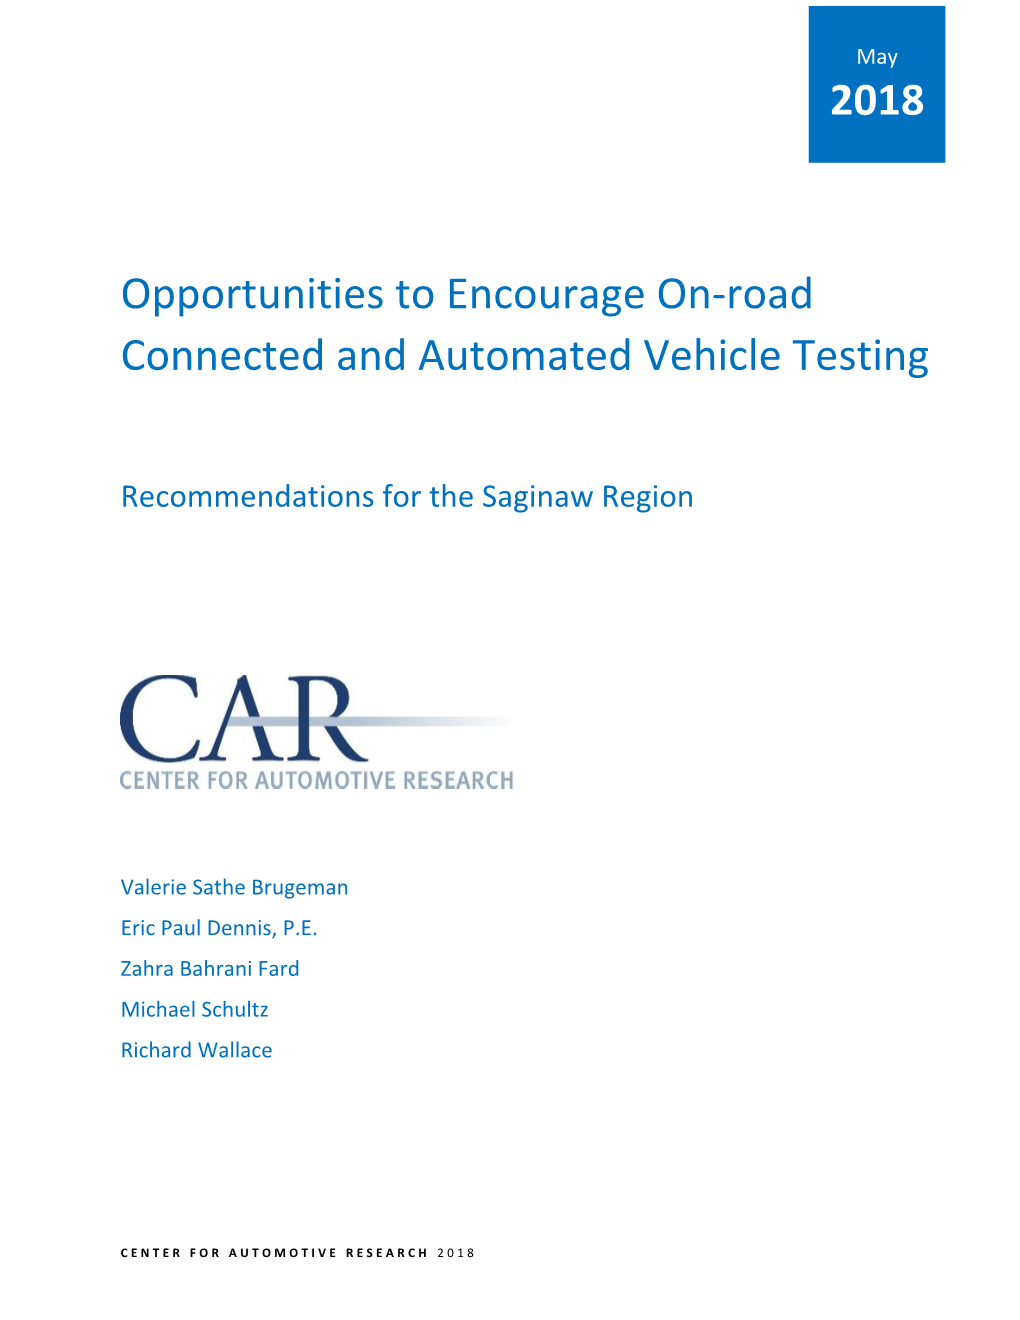 Opportunities to Encourage On-Road Connected and Automated Vehicle Testing